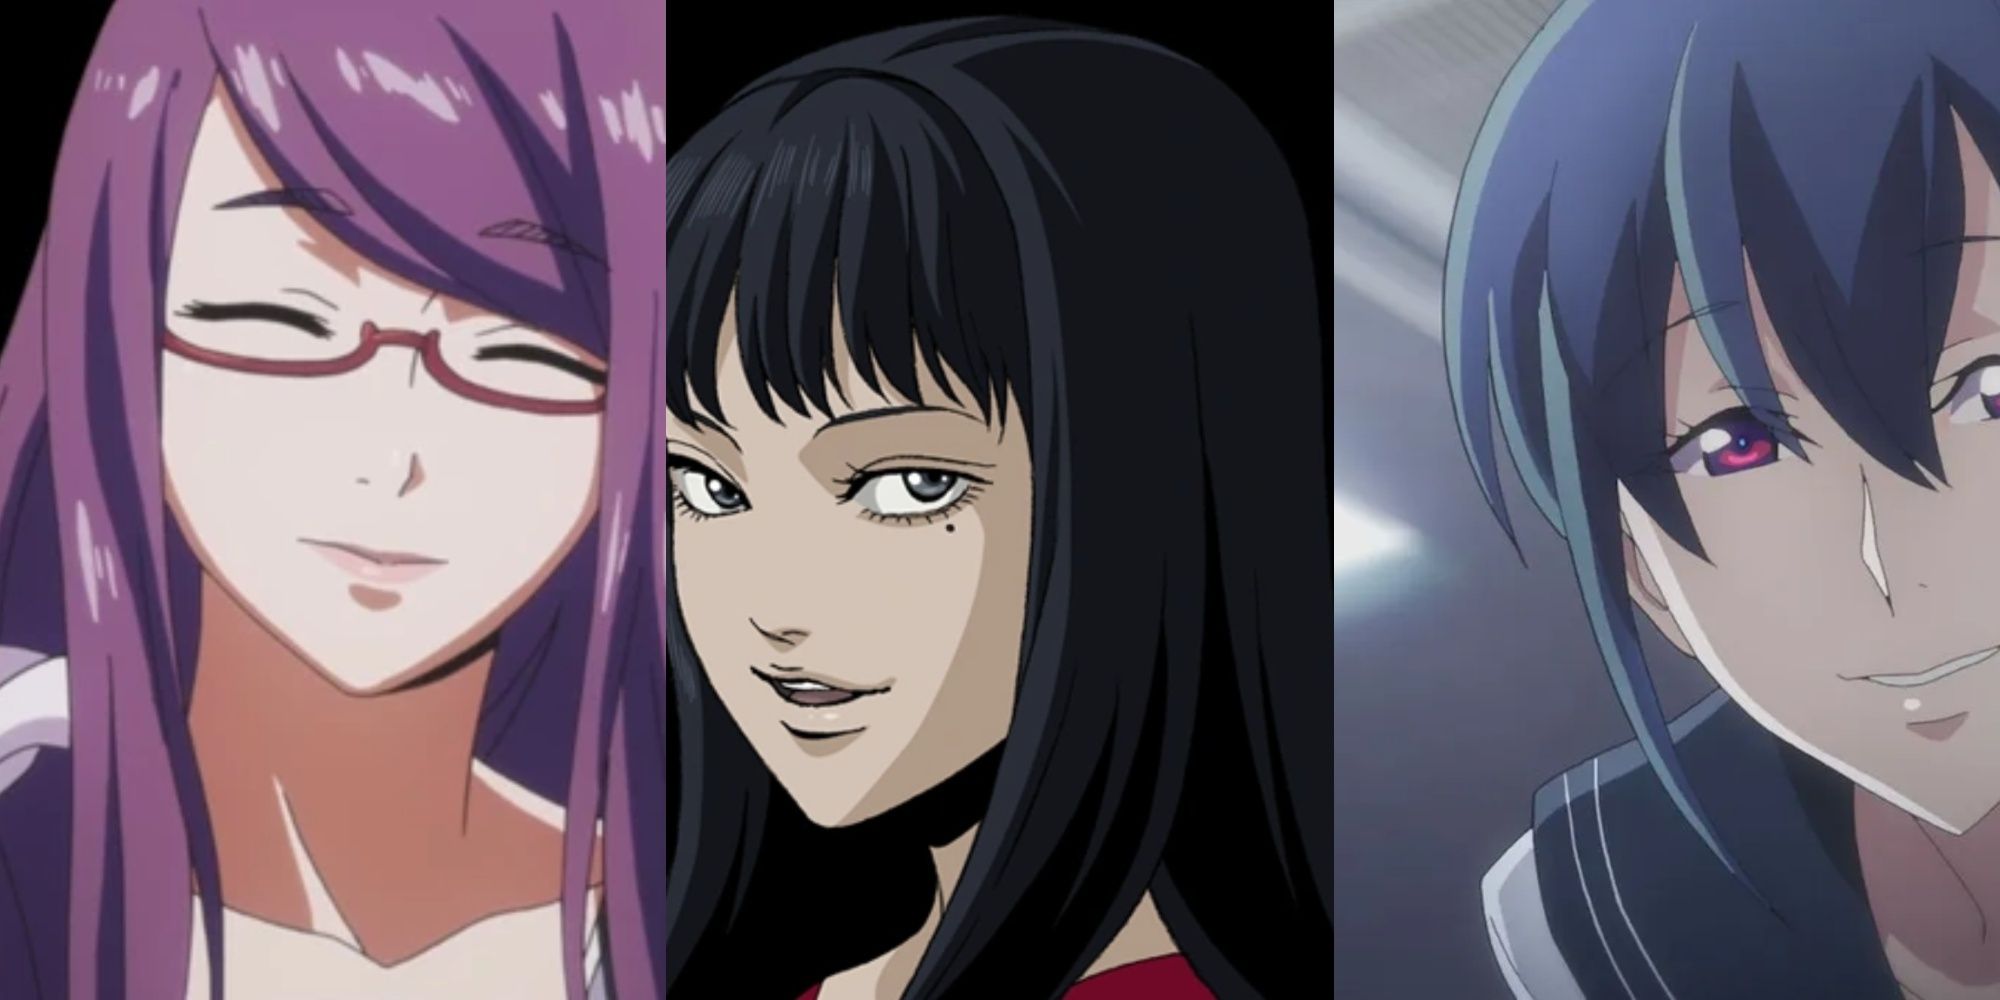 Rise, Tomie and Ai